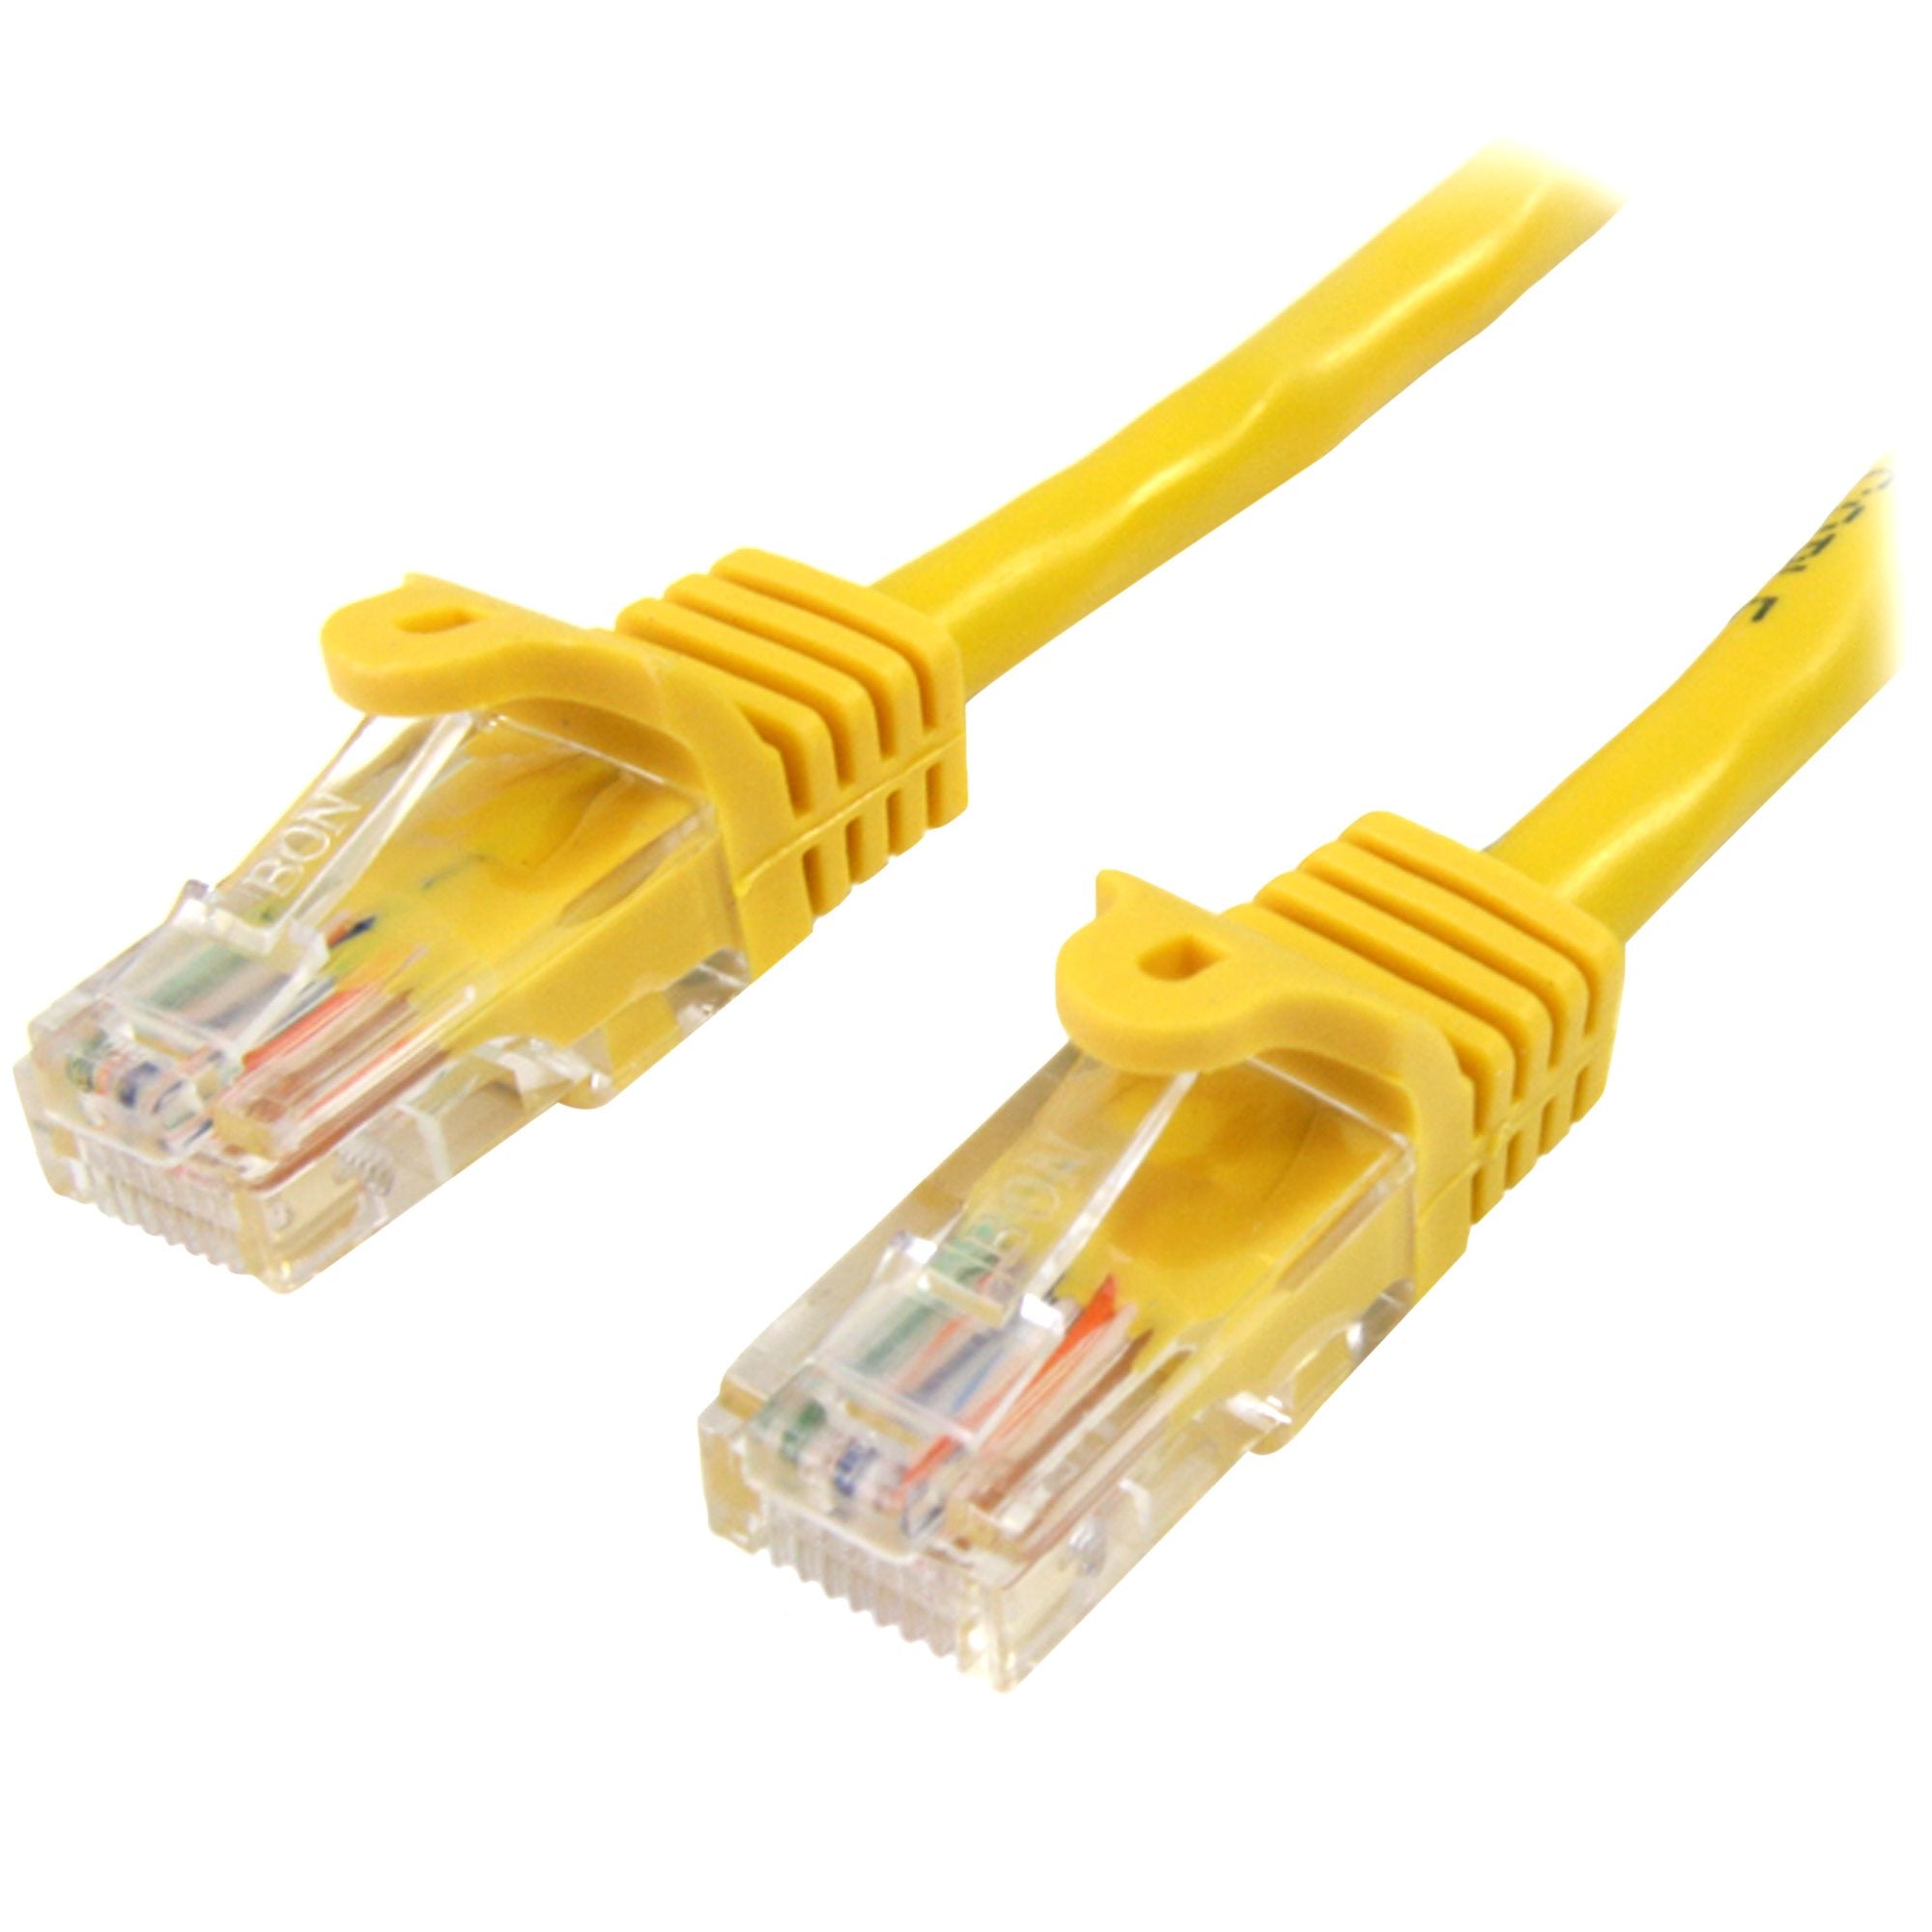 StarTech.com Cat5e Ethernet Patch Cable with Snagless RJ45 Connectors - 0.5 m, Yellow